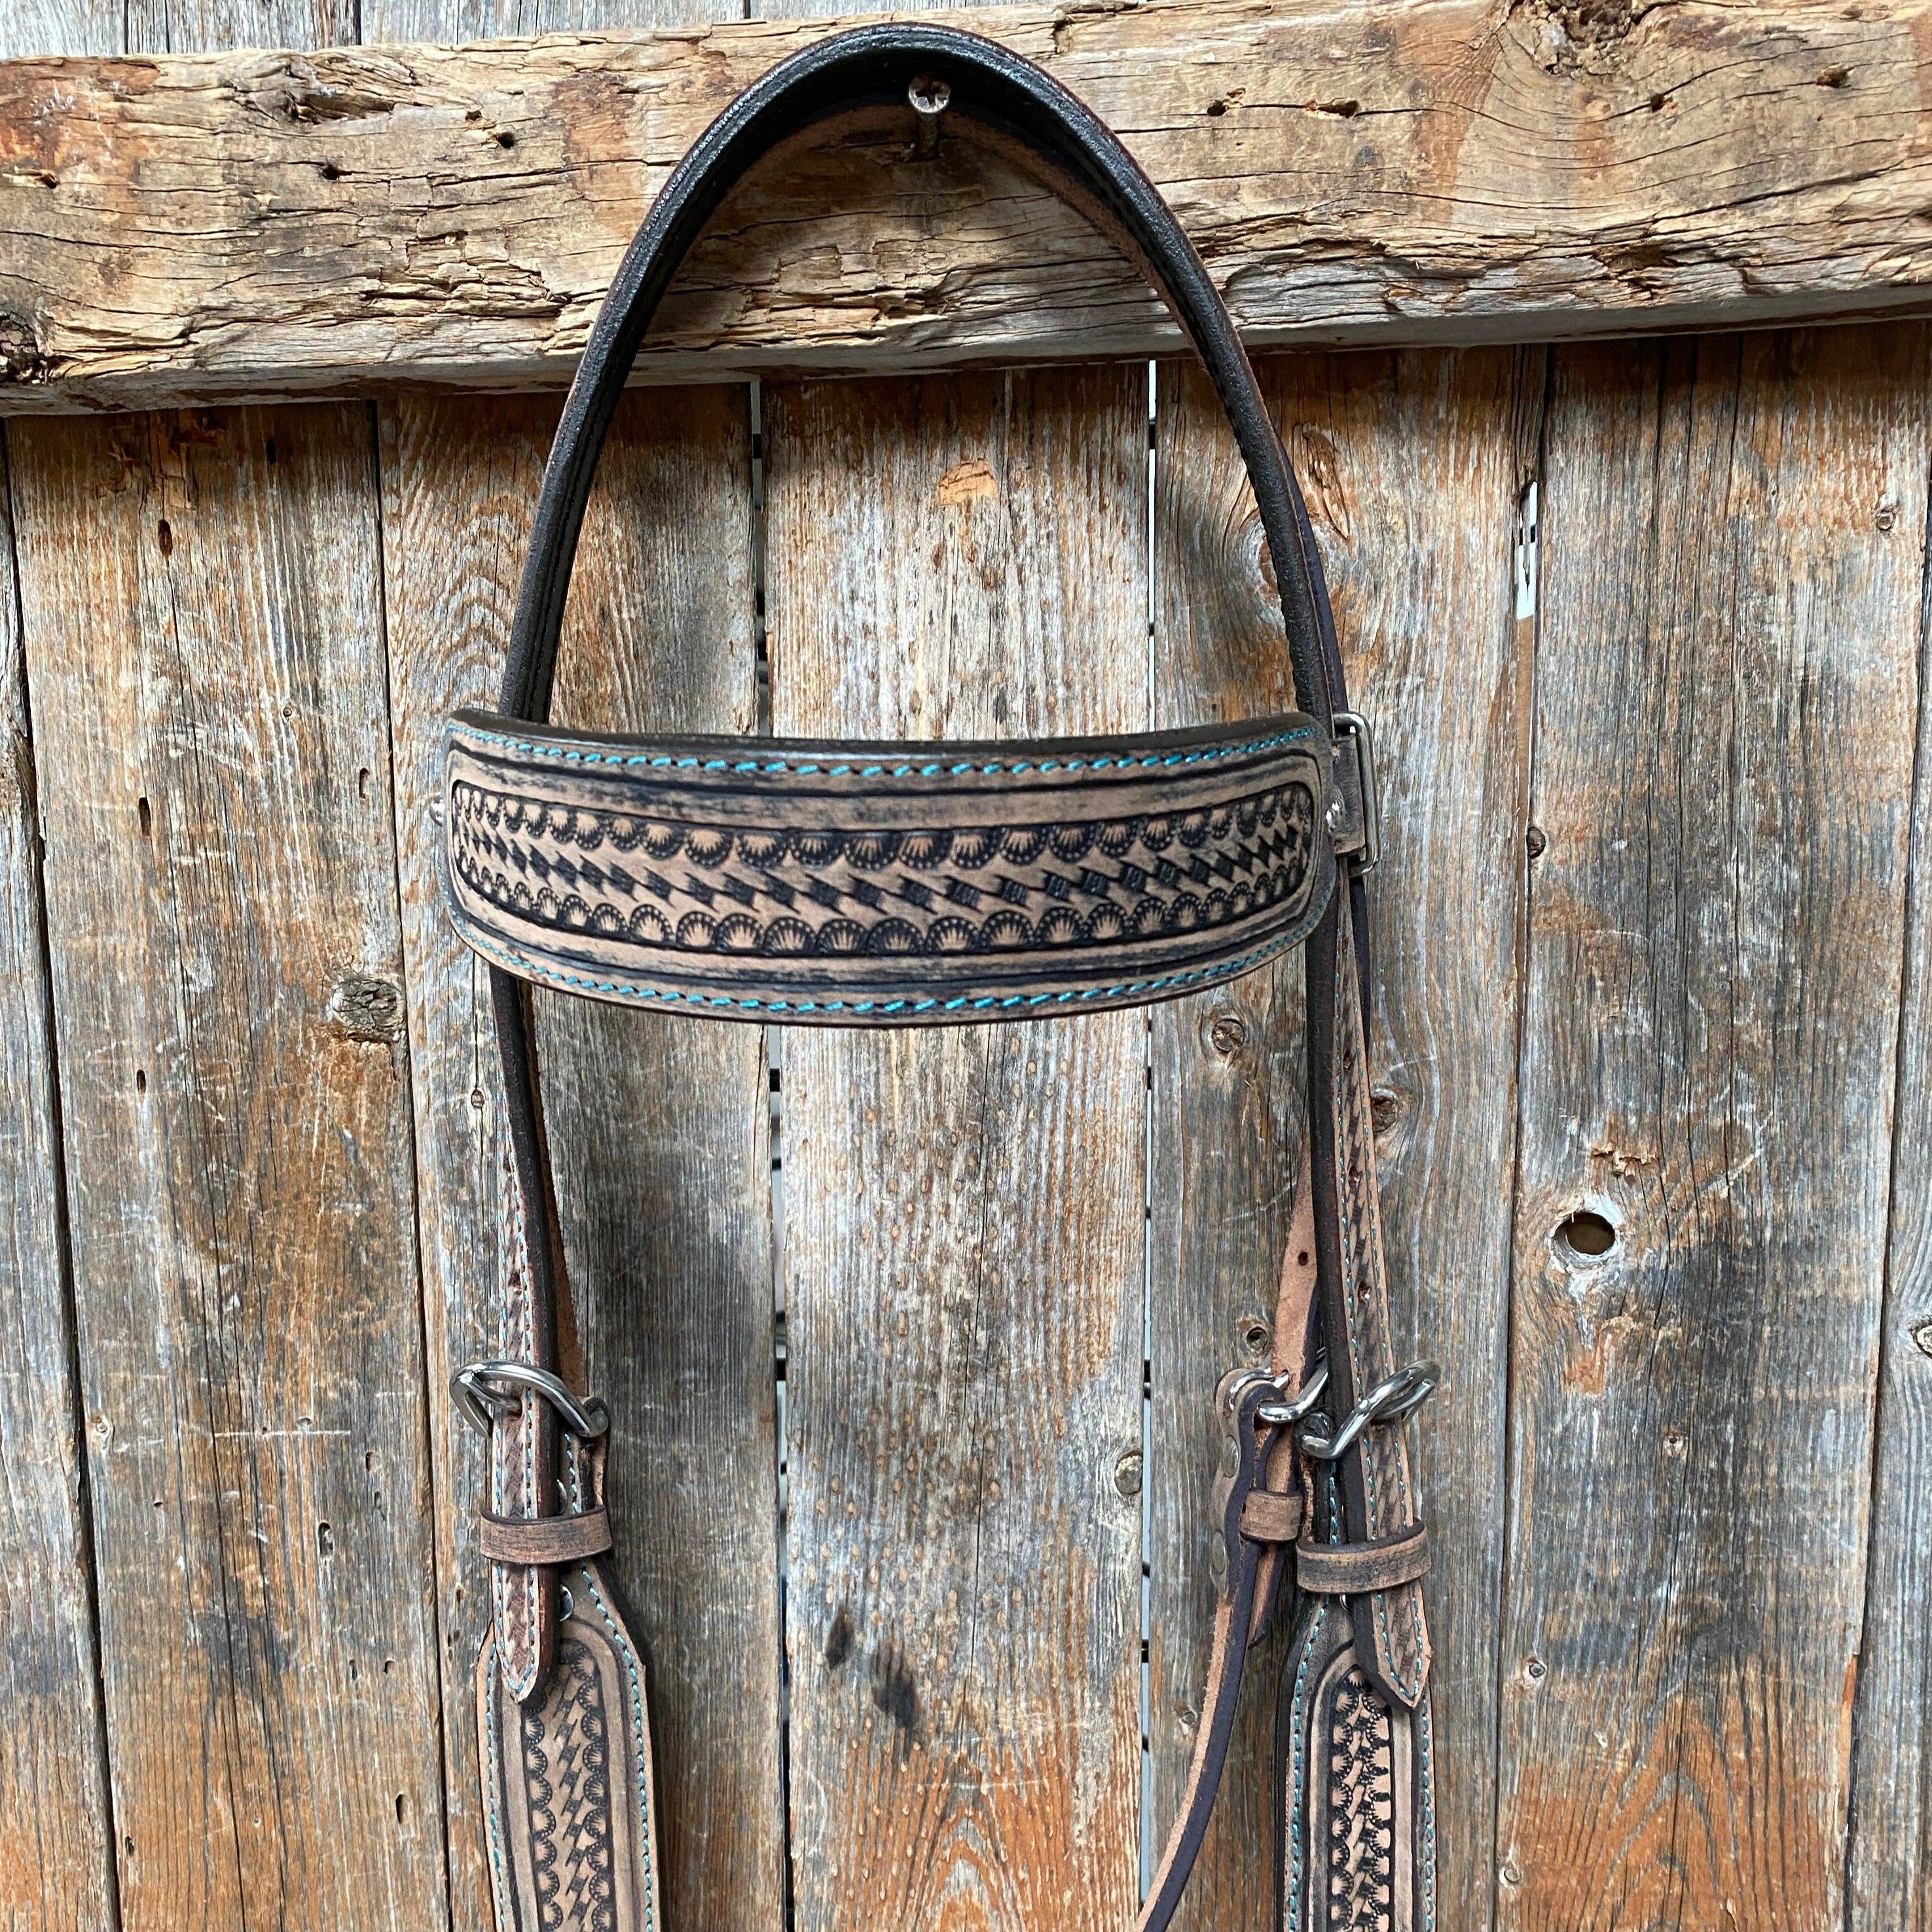 Brushed Buckskin Teal Stitch Browband Headstall/Bridle #ST900 - RODEO DRIVE